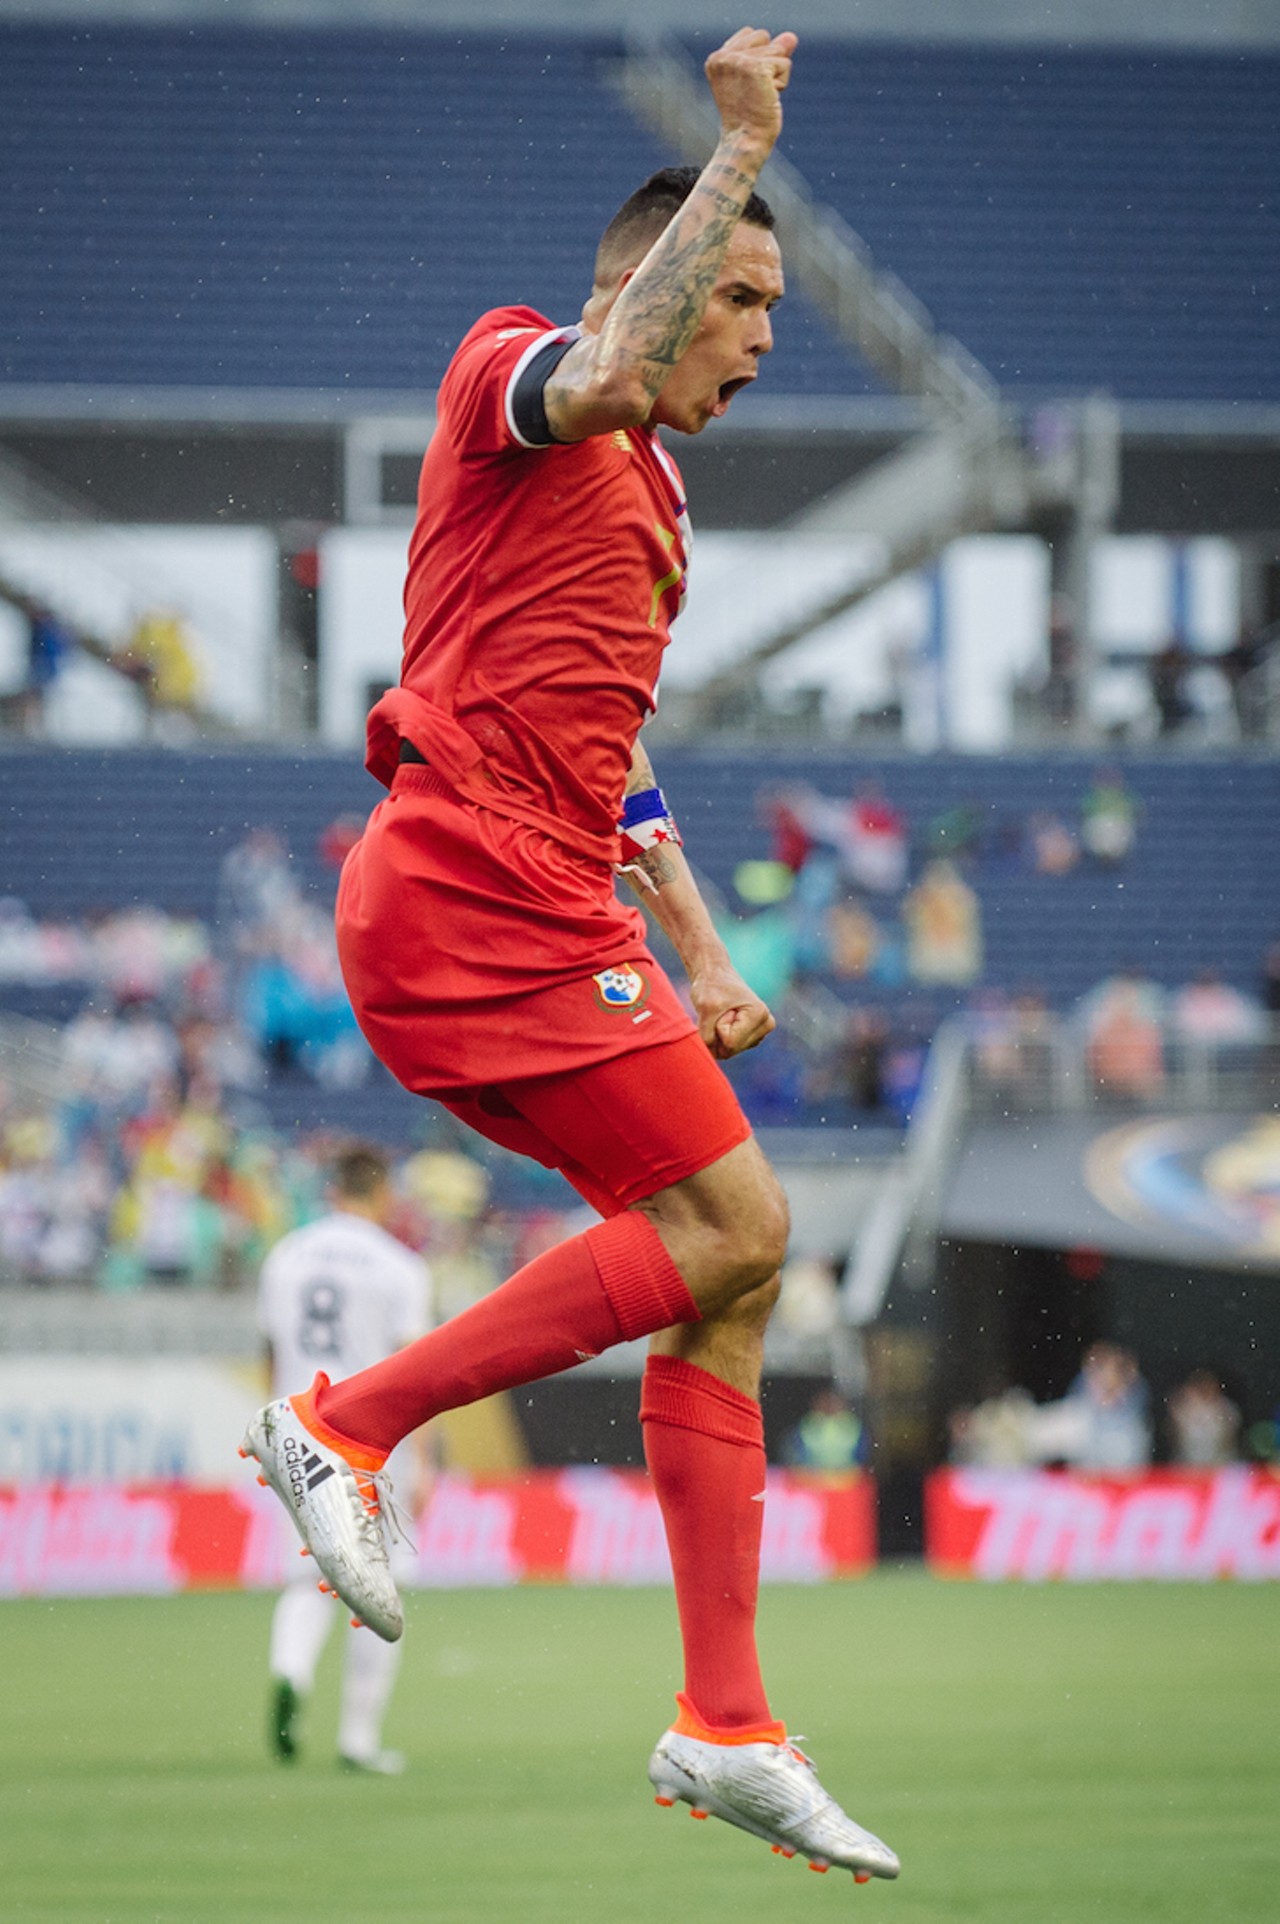 Photos from Panama's 2-1 victory over Bolivia at Copa America